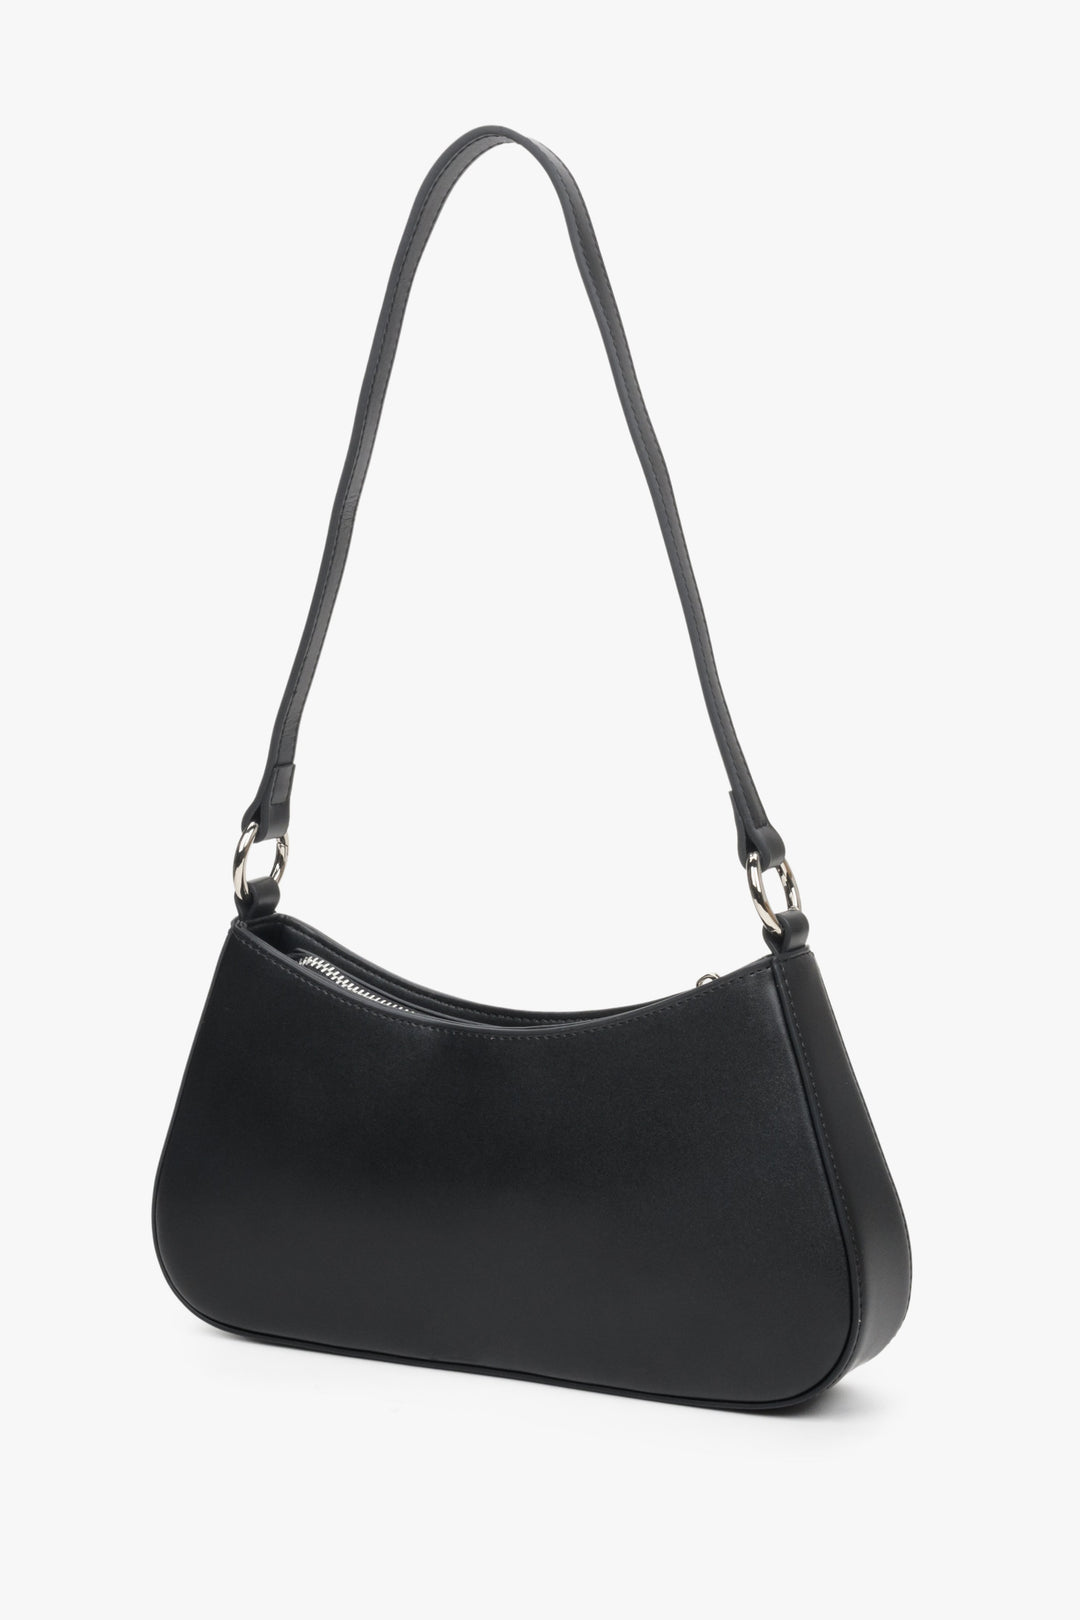 Leather, small baguette-style shoulder bag in black by Estro - reverse side.